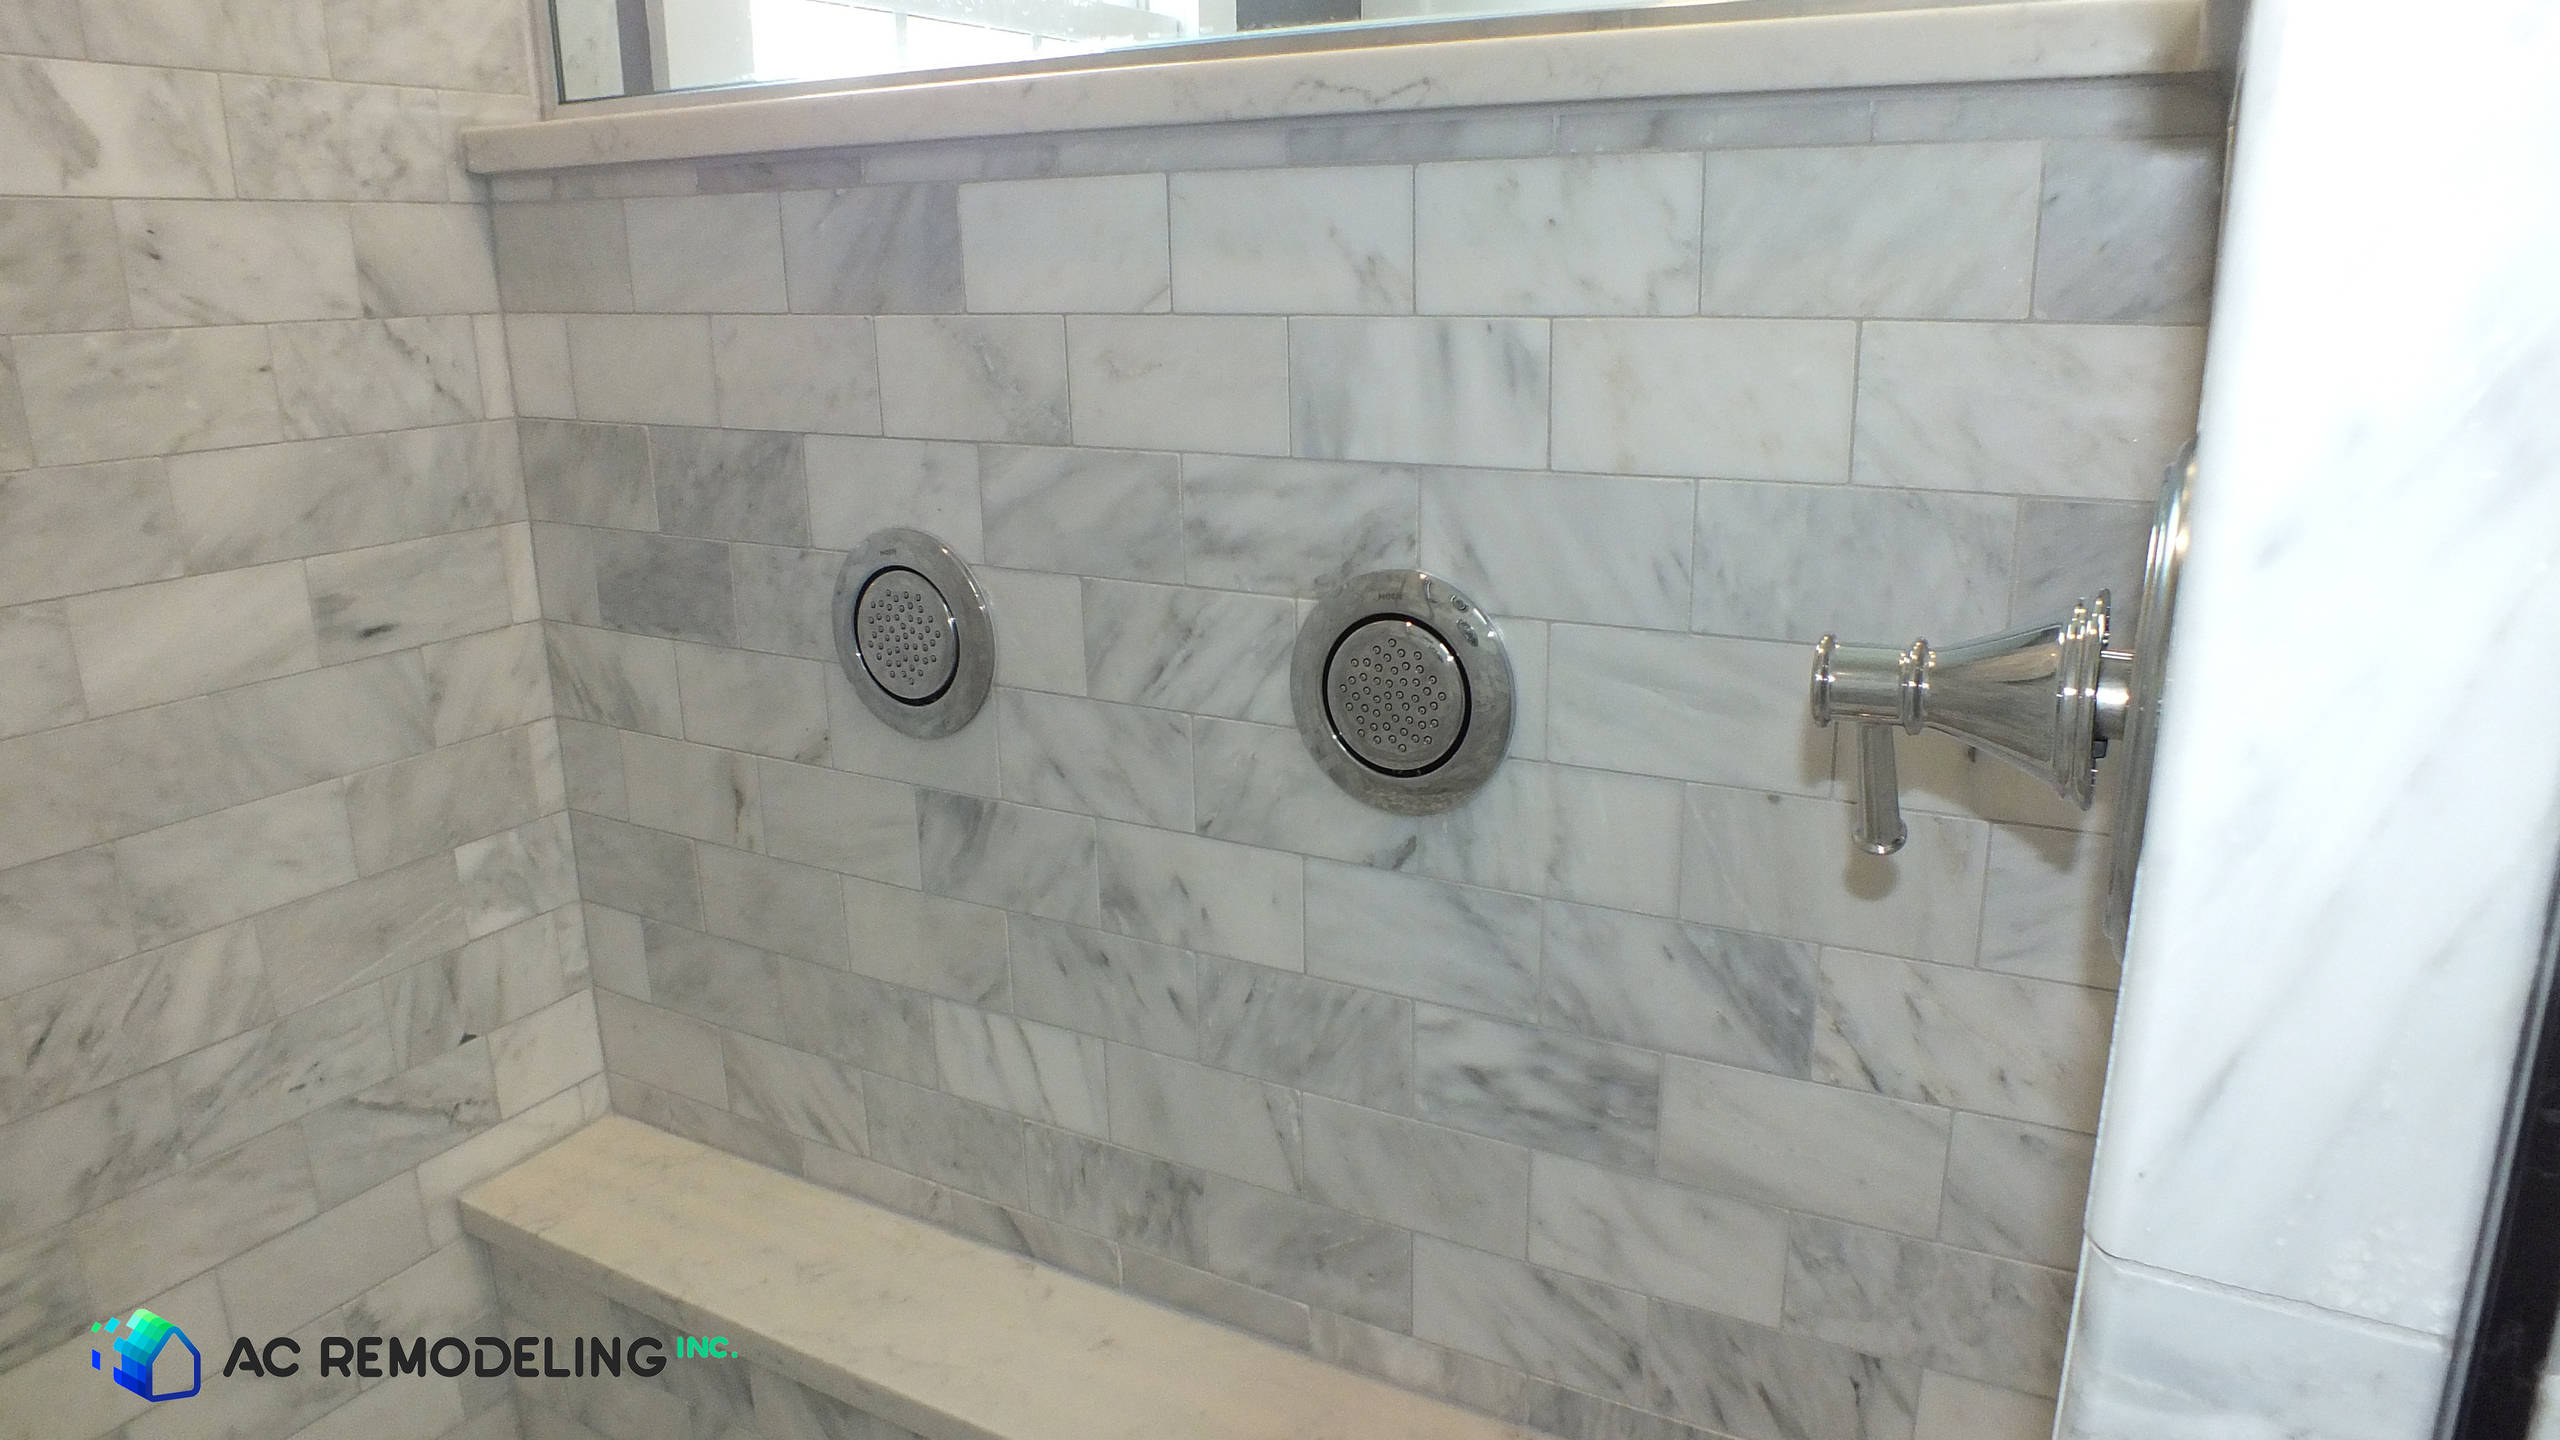 Arabescato marble shower wall and body sprays for this spa-like master bath.